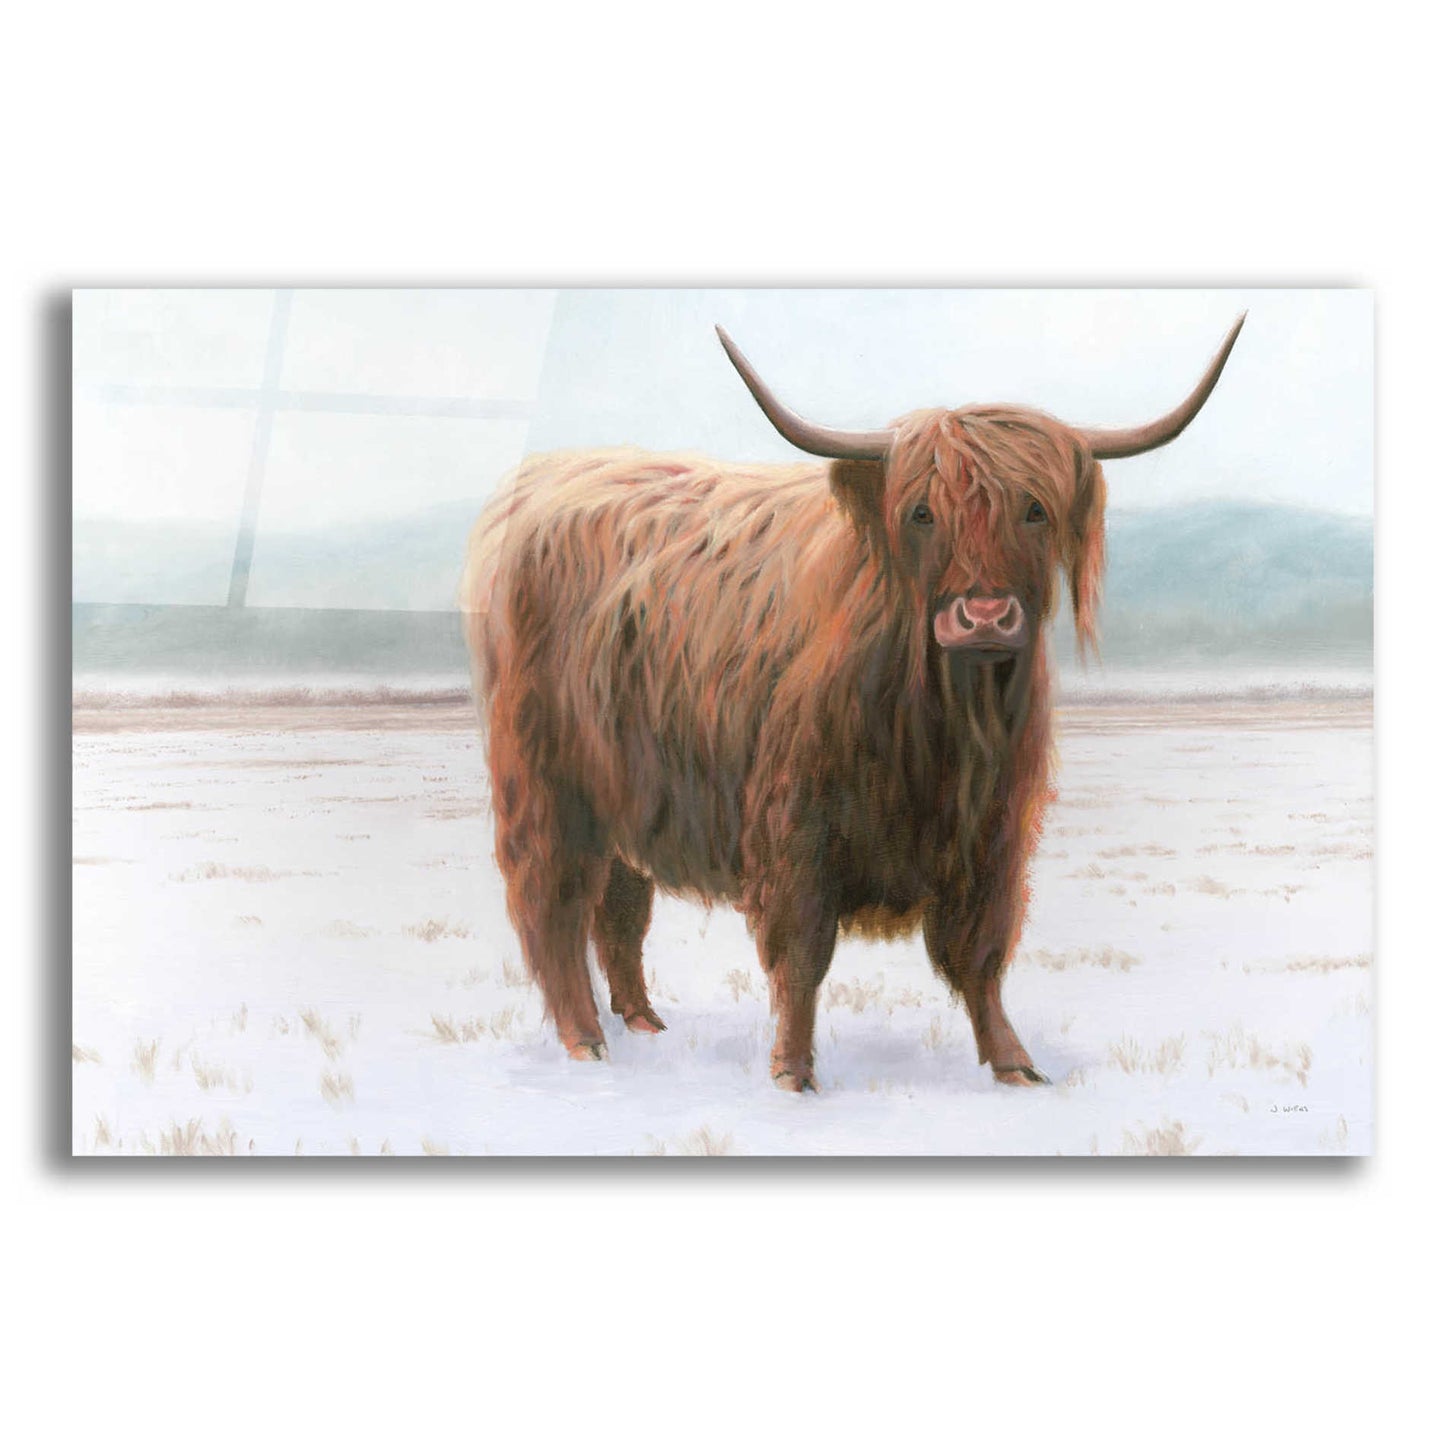 Epic Art 'King of the Highland Fields' by James Wiens, Acrylic Glass Wall Art,18x12x1.1x0,26x18x1.1x0,40x26x1.74x0,60x40x1.74x0